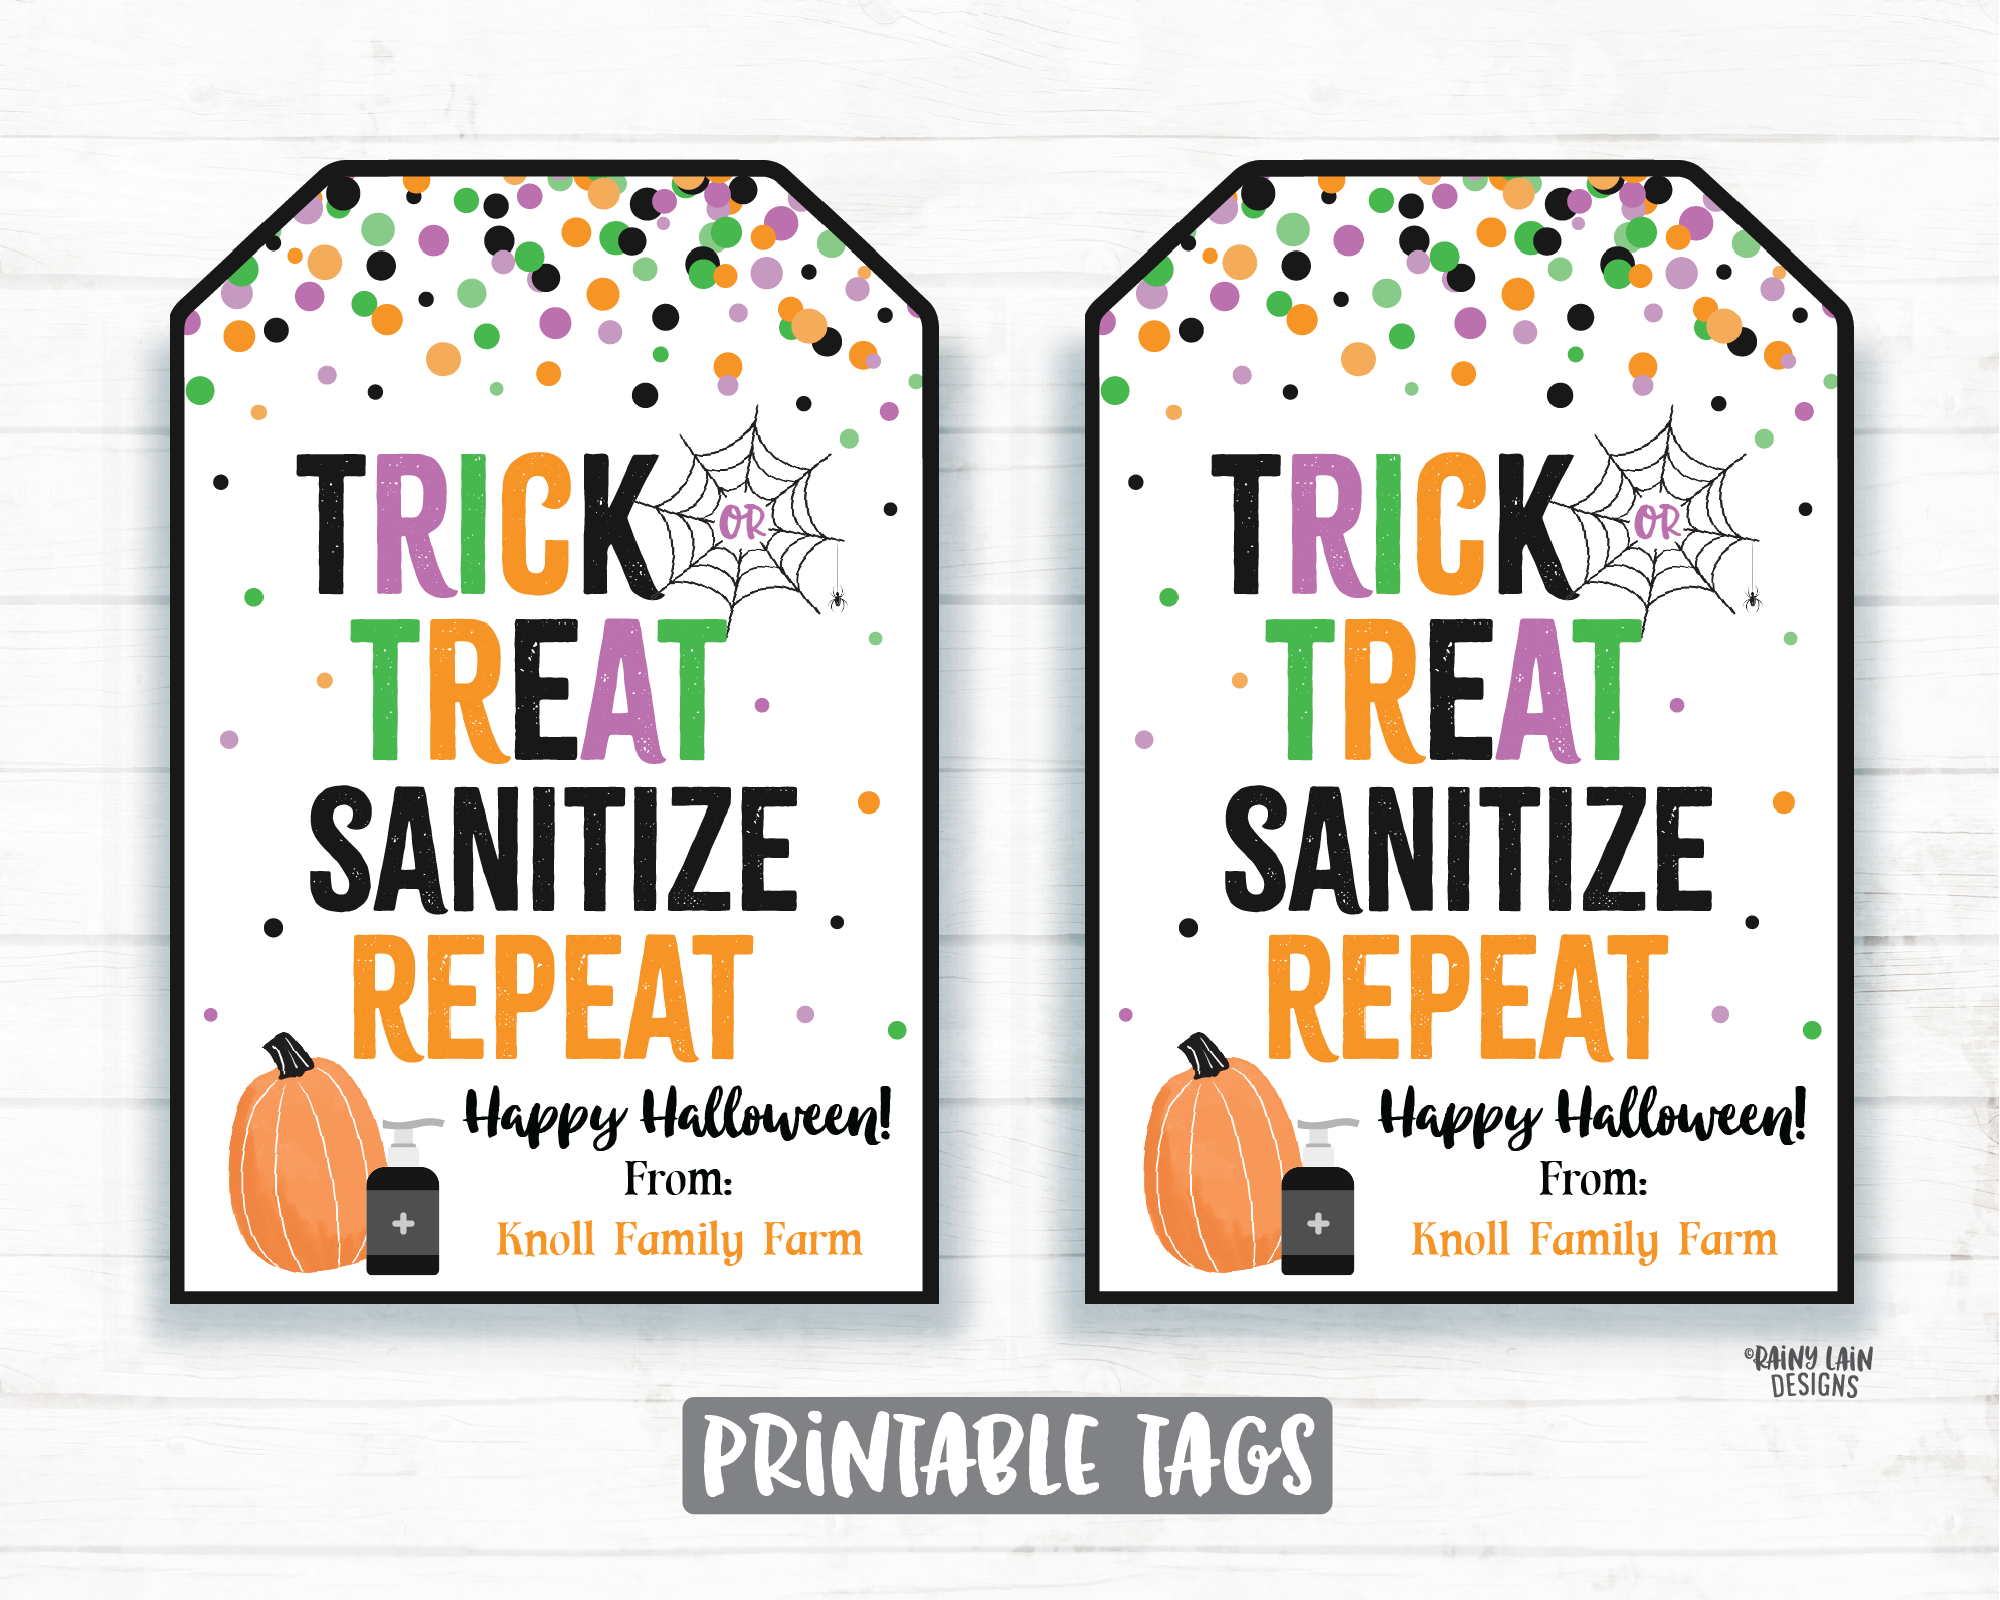 Trick or Treat Sanitize Repeat Tags Printable Halloween Tag Editable Hand Sanitizer Tags Halloween 2020 Ideas Pandemic Social Distancing